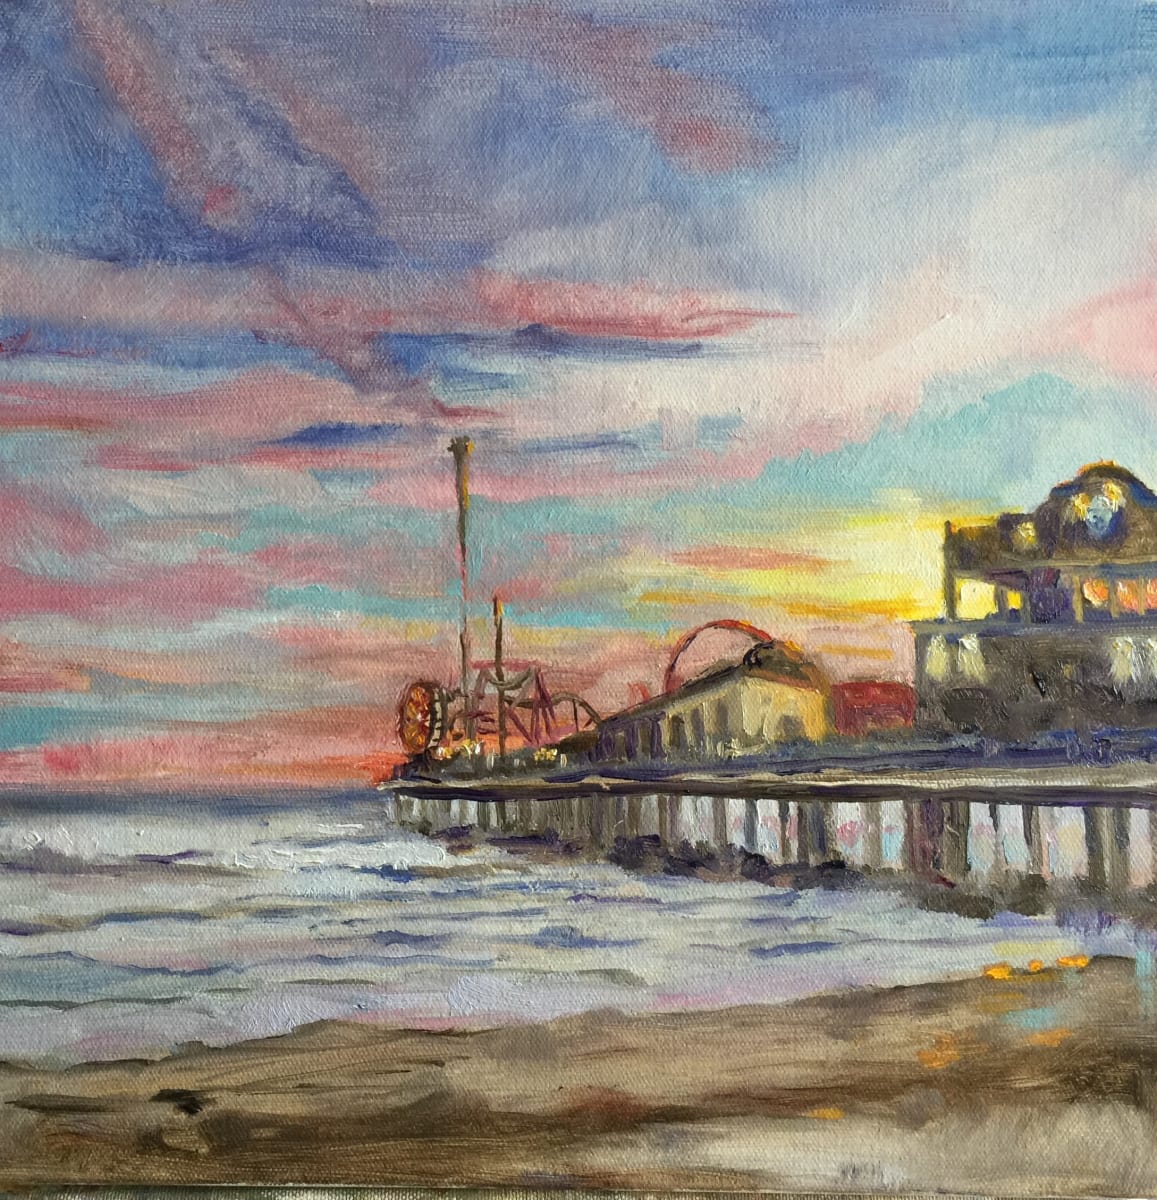 Remembering a wonderful Day by susan tyler  Image: image of sunset and the iconic Galveston pier. 